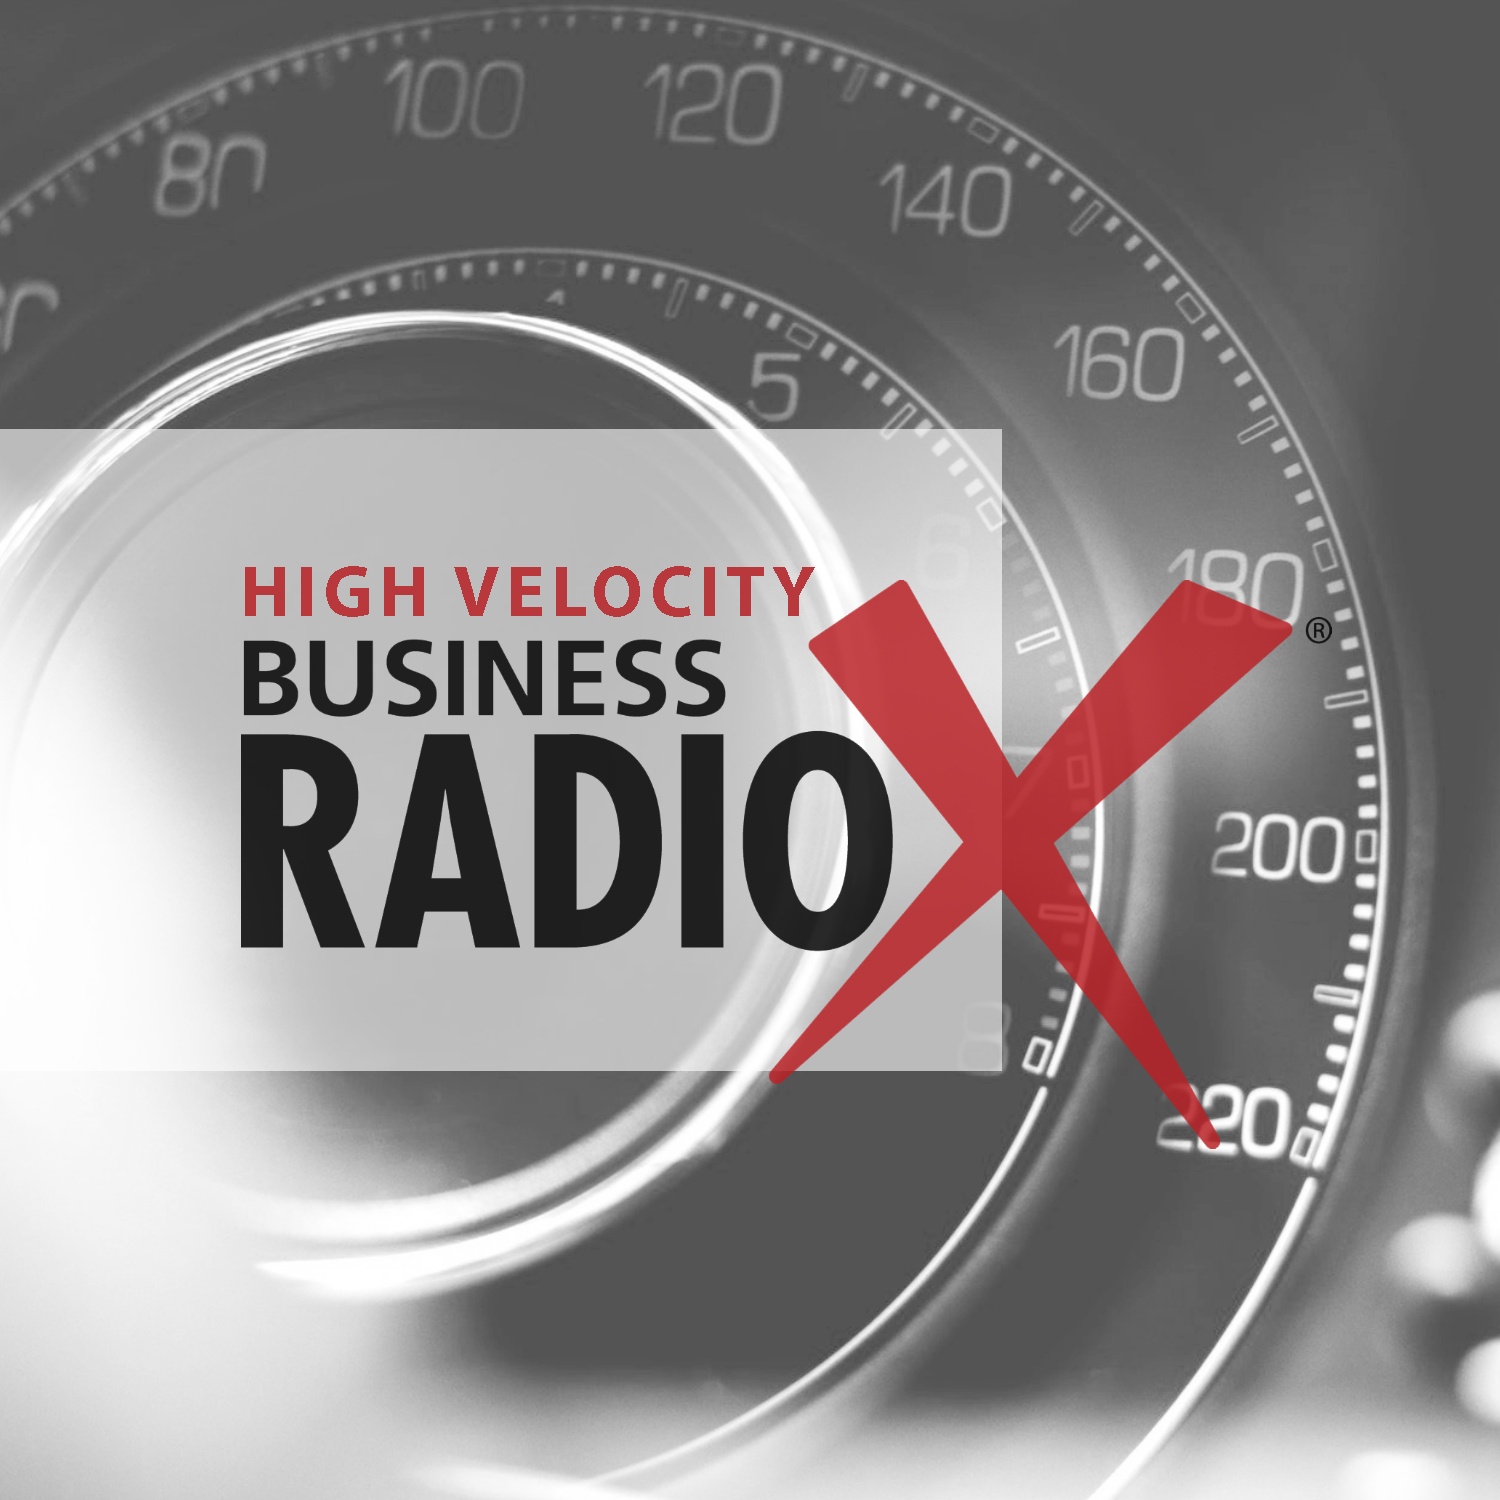 High Velocity Radio Interviews Pete Canalichio With Licensing Brands, Inc.